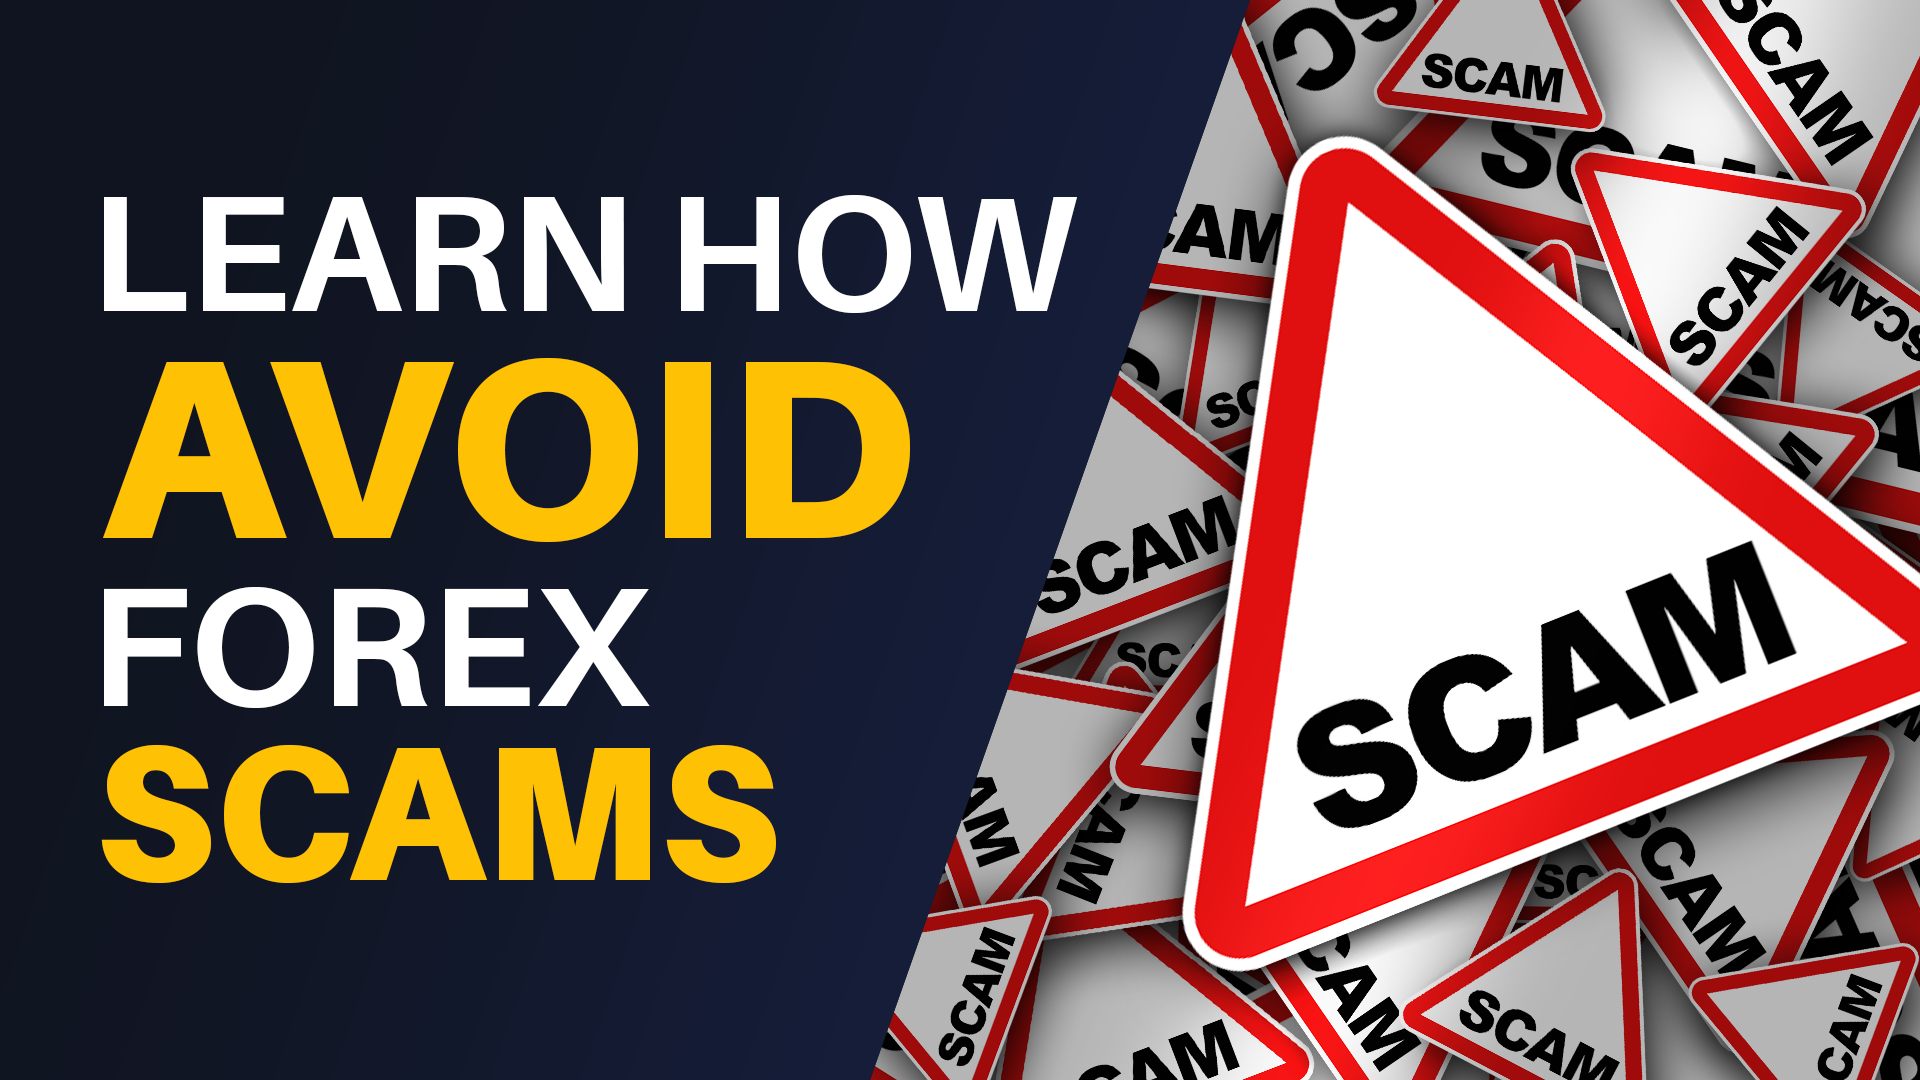 forex scams list